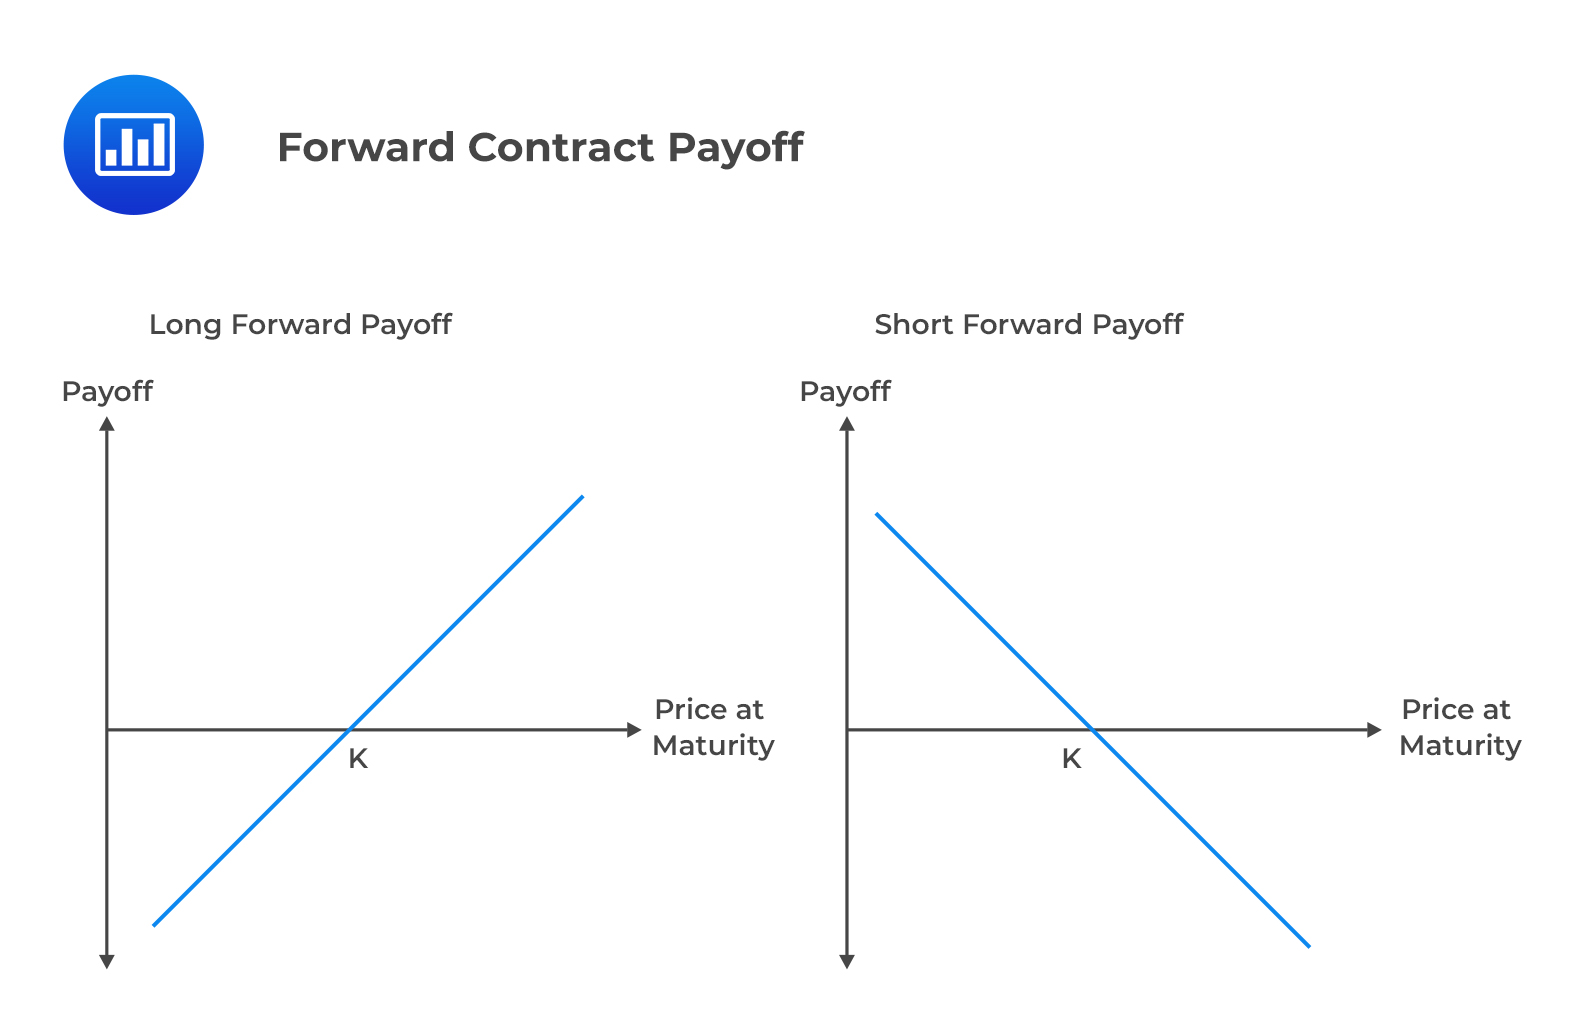 Forward Contract Payoff